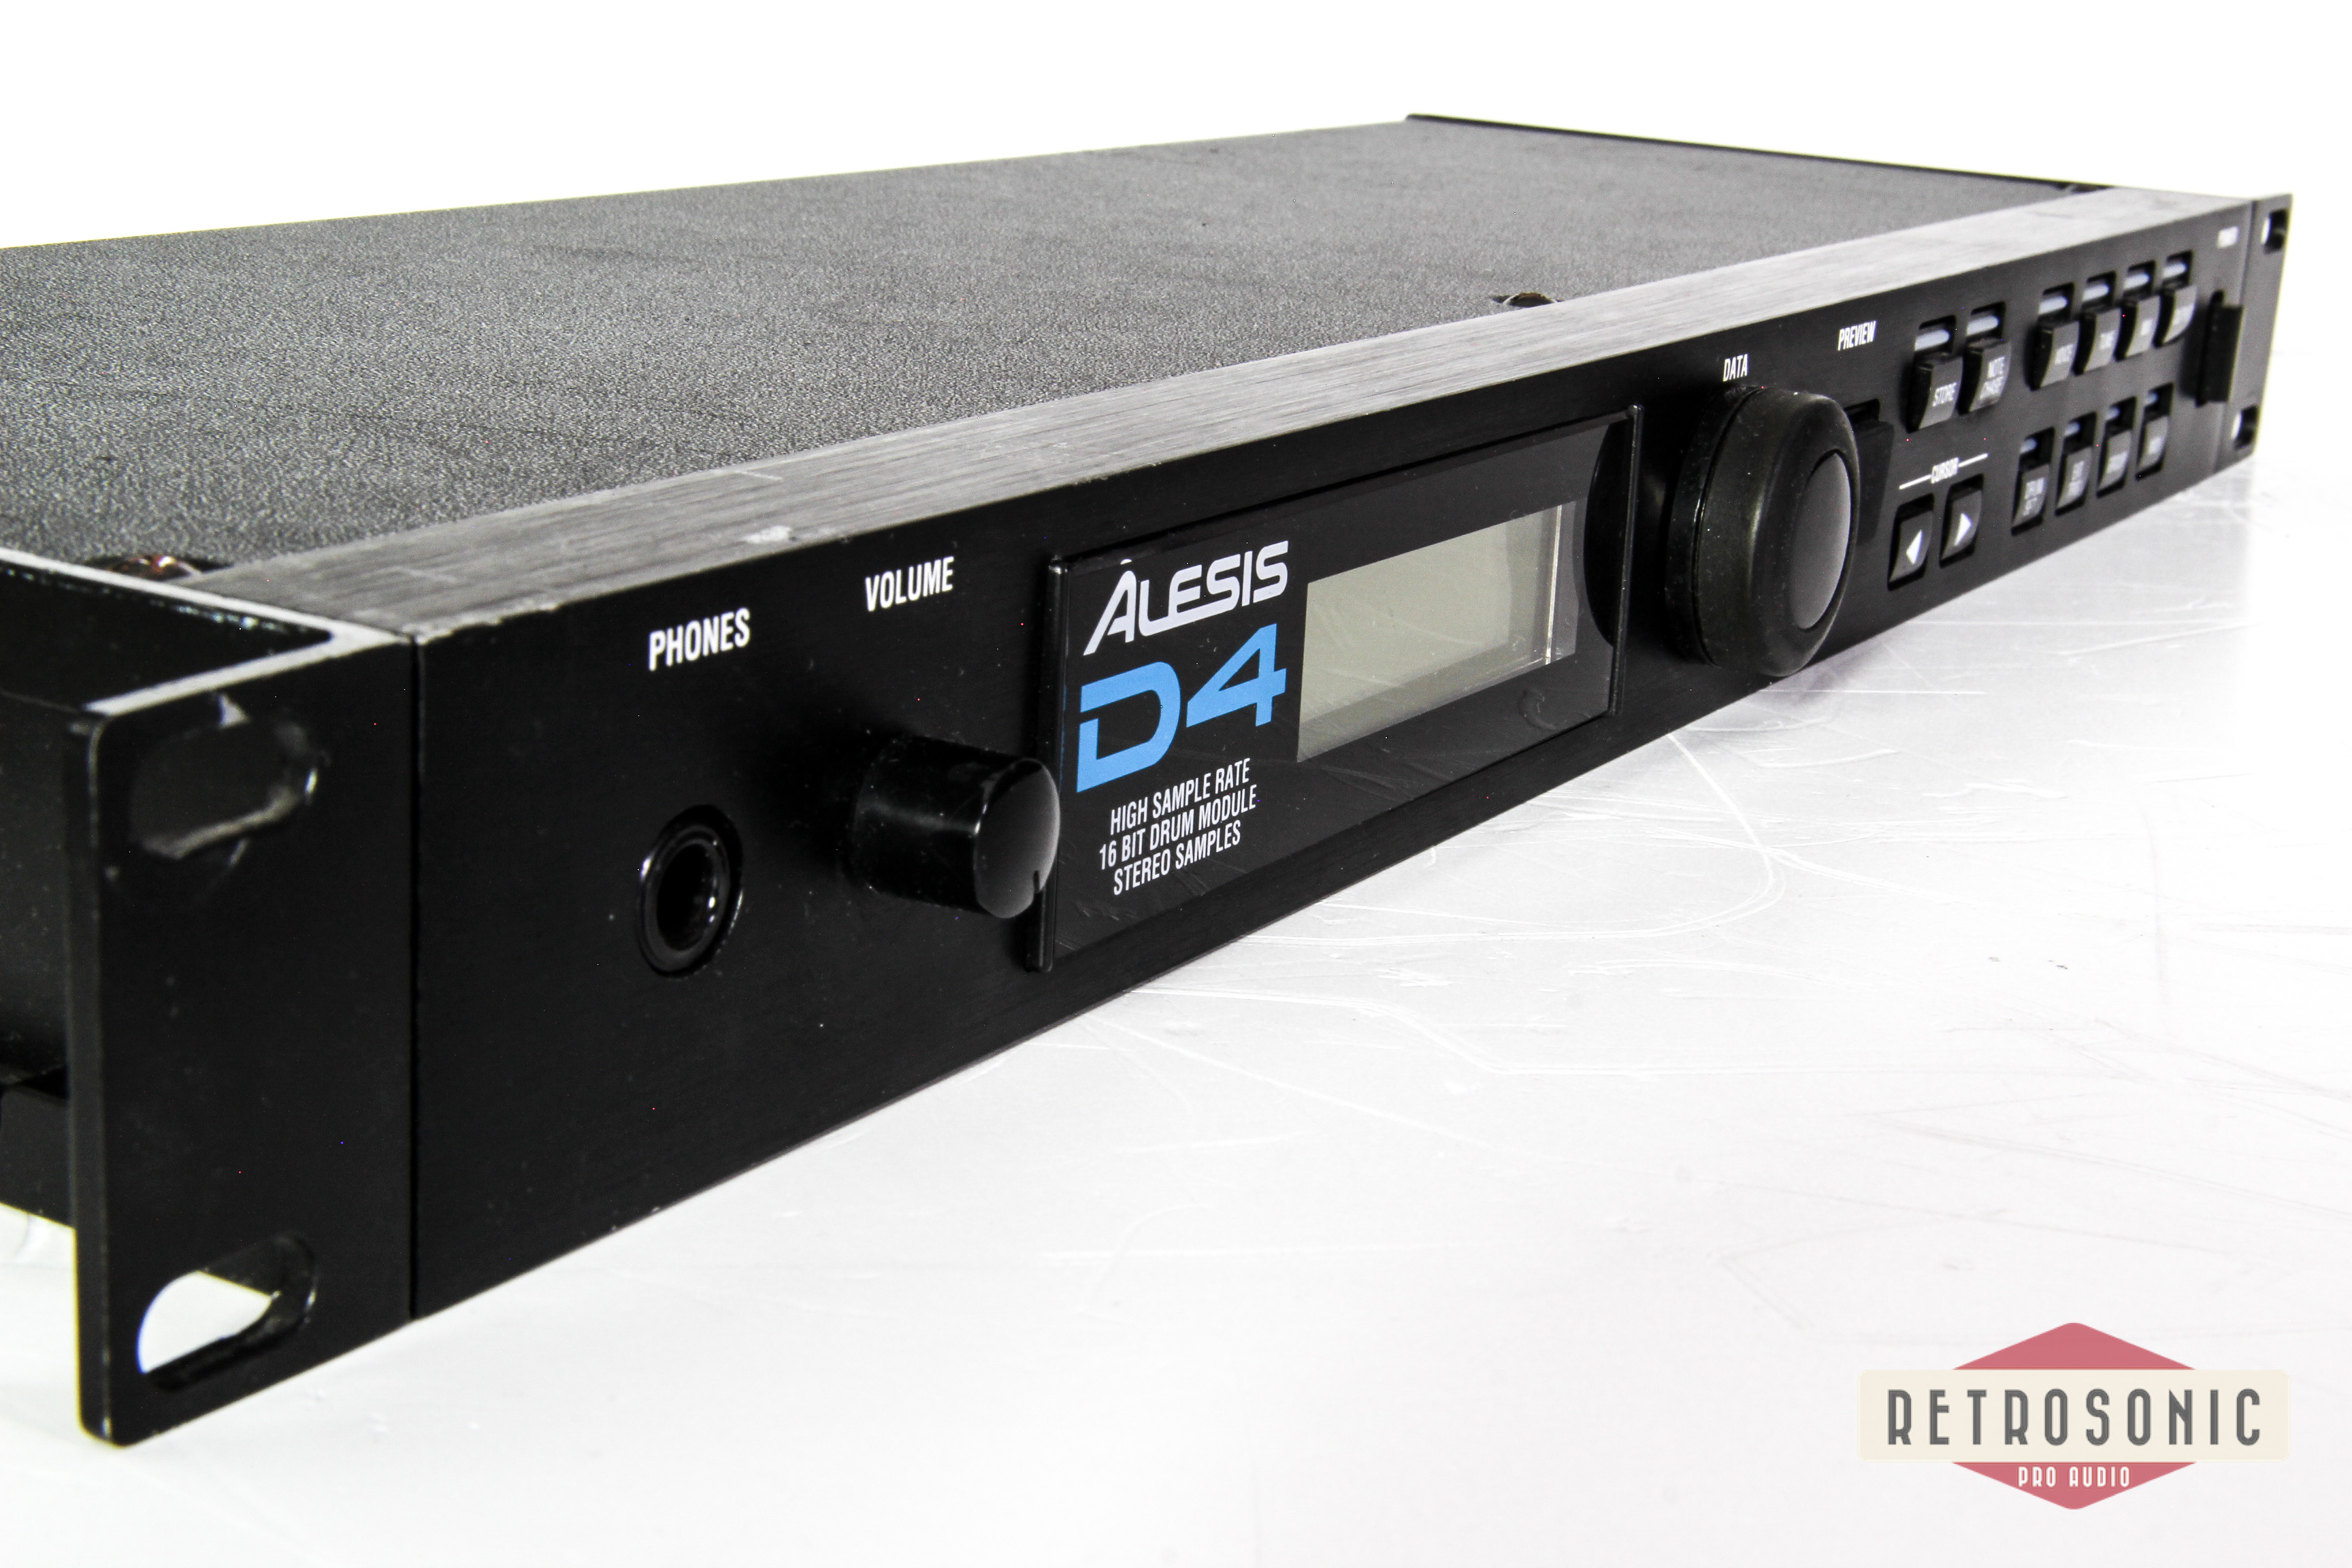 Alesis D4 Drum and Percussion sound module